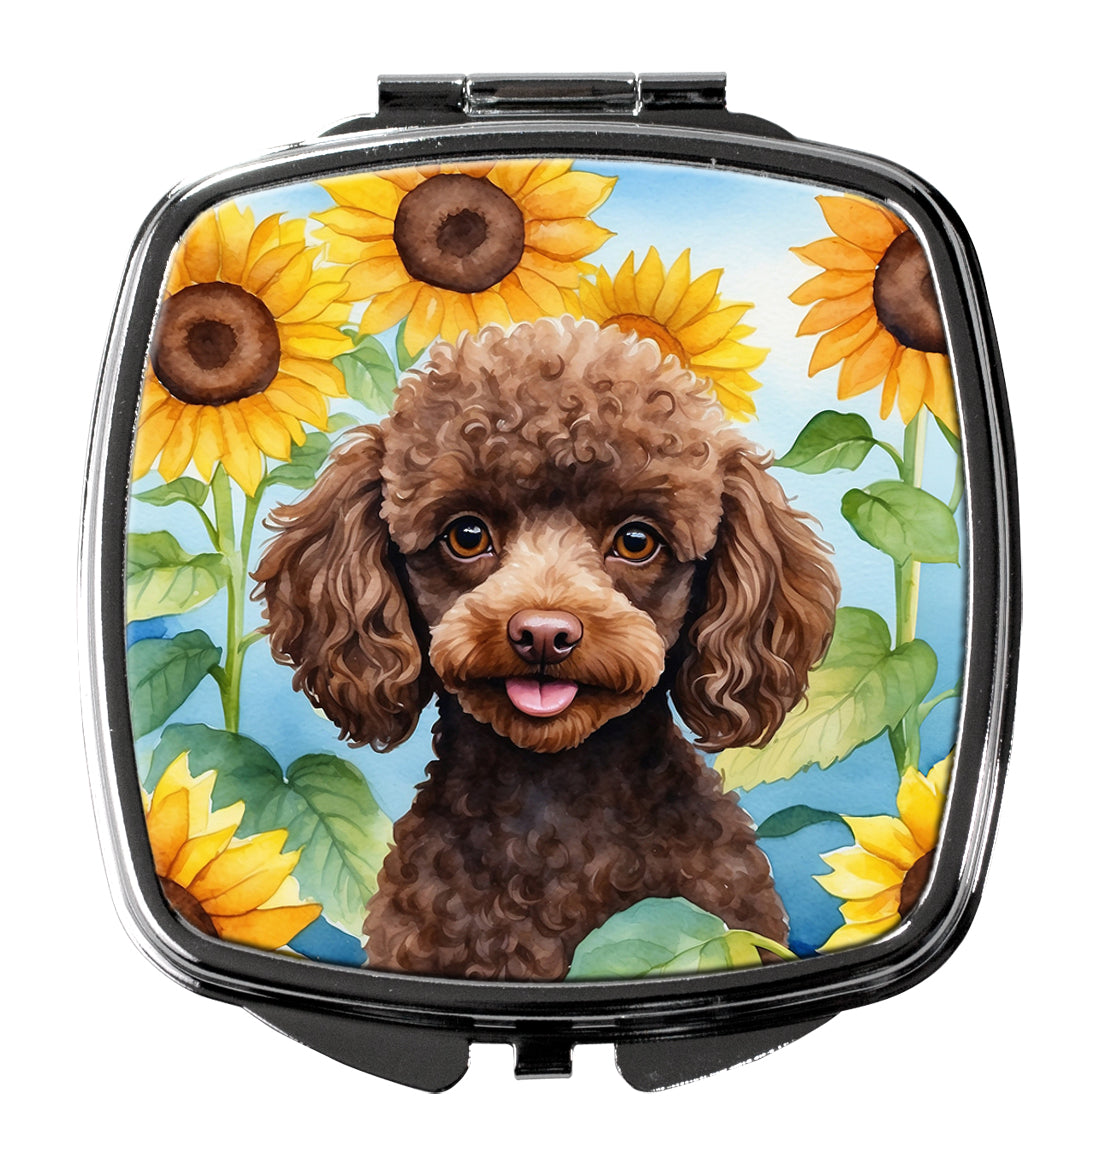 Buy this Chocolate Poodle in Sunflowers Compact Mirror